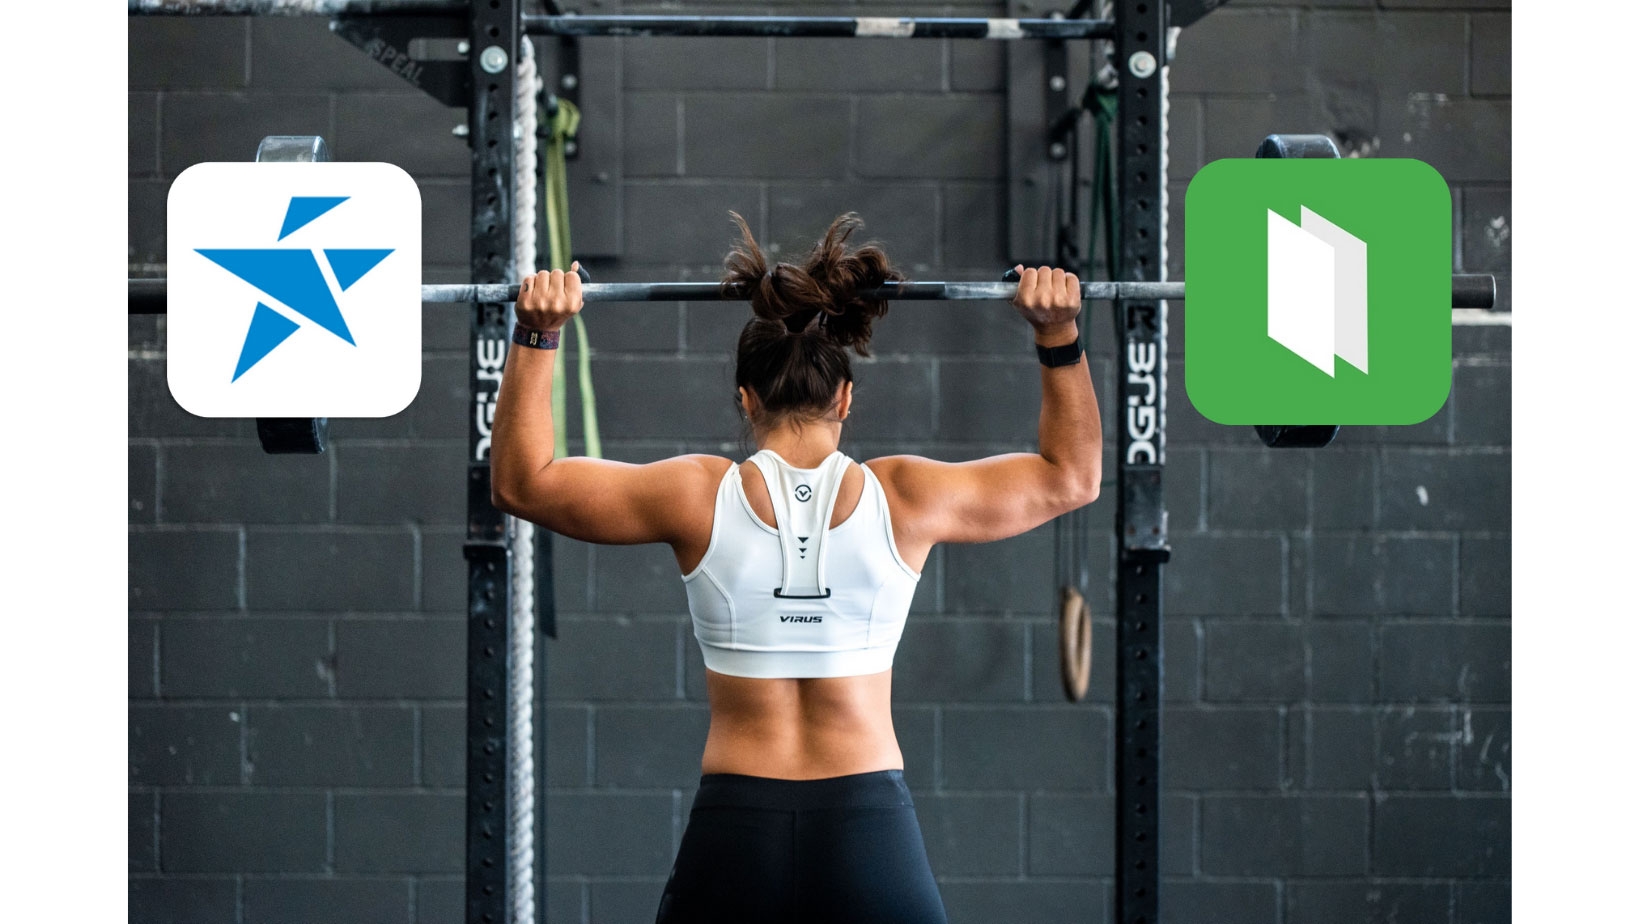 Perfect Gym and Agence Mac Media team up to digitally transform Canadian fitness